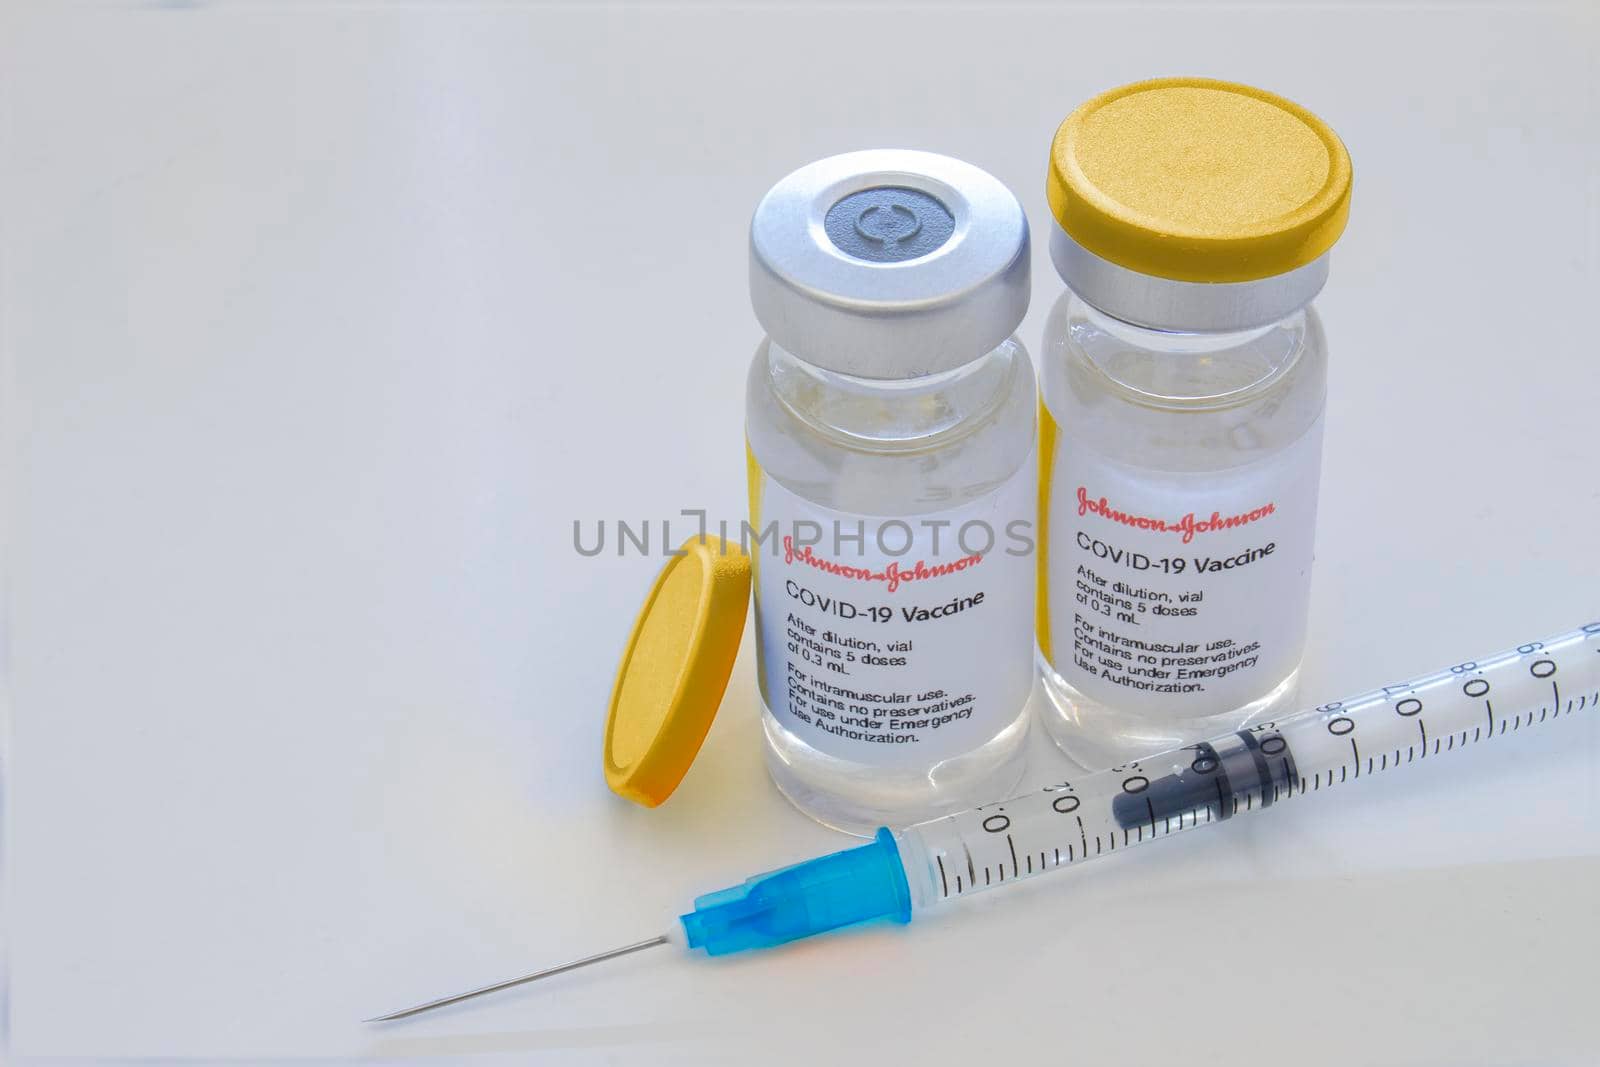 Calgary, Alberta, Canada. April 29, 2021. A couple of Johnson & Johnson dosis of Covid-19 vaccines on vial bottles and an injection syringe. by oasisamuel